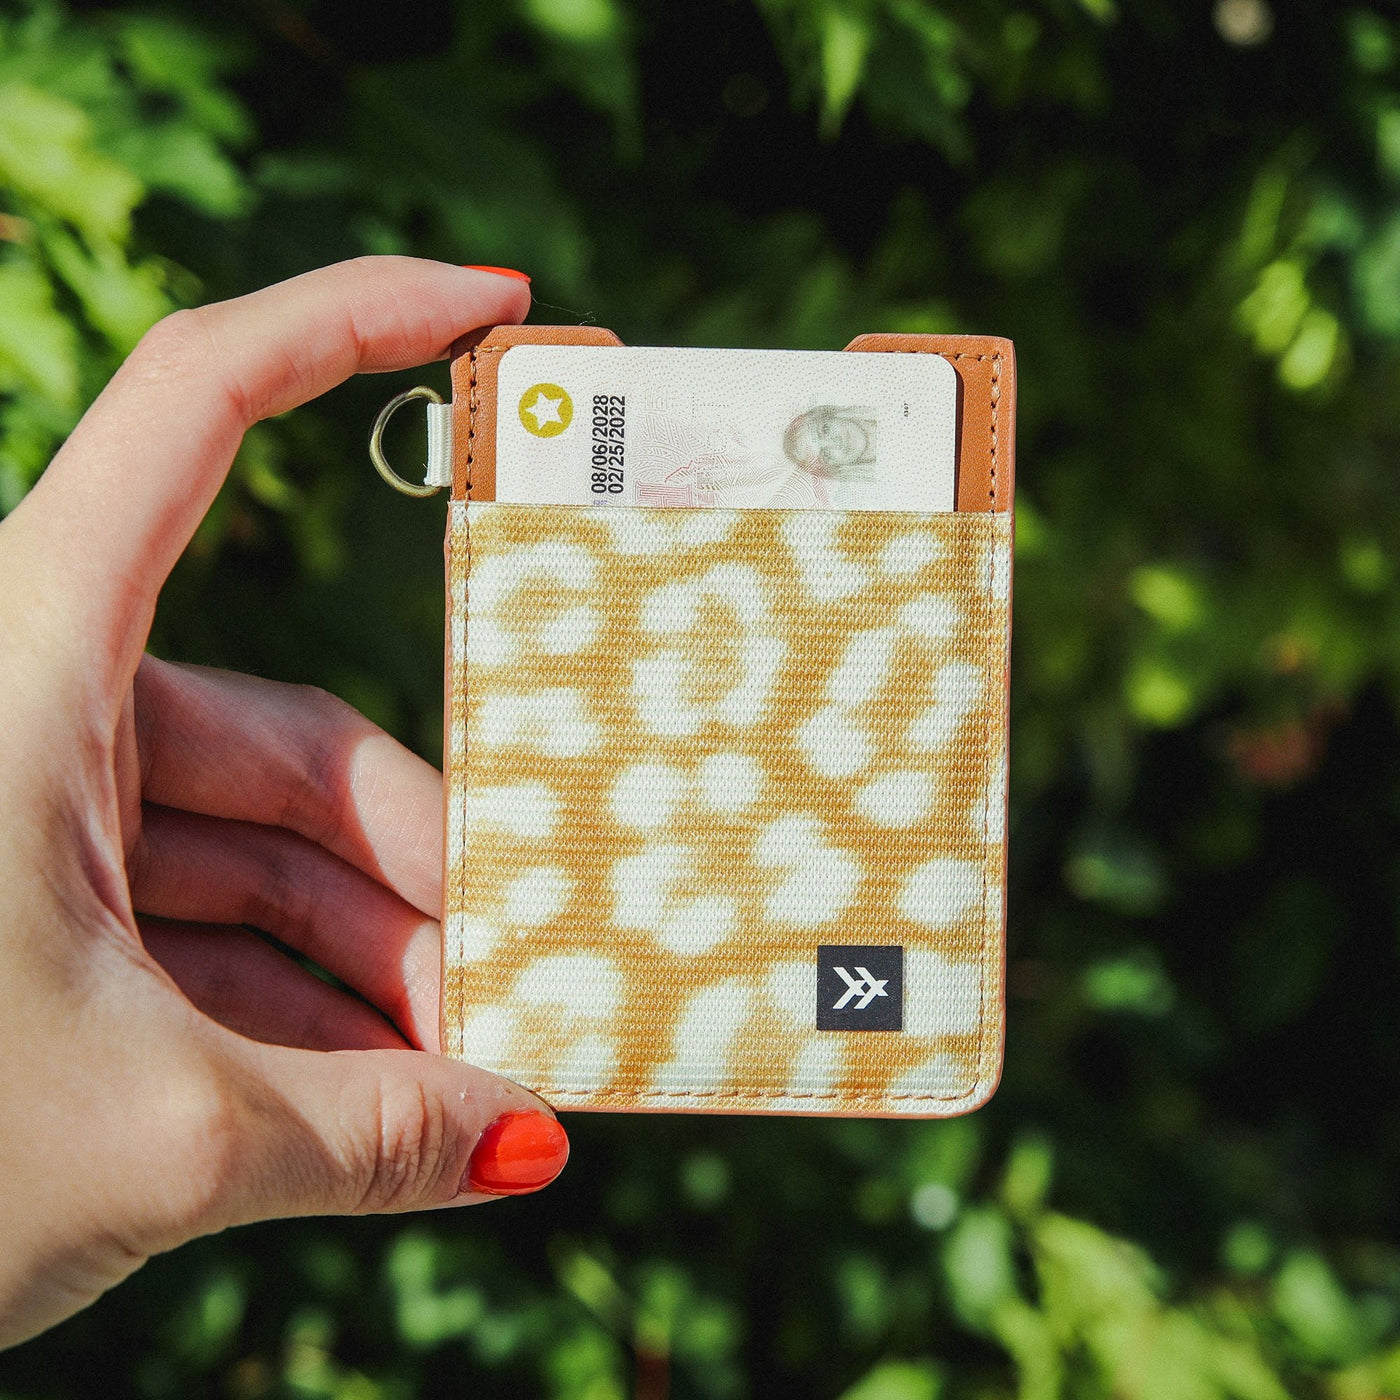 Brown leather card holder with orange and cream leopard print elastic